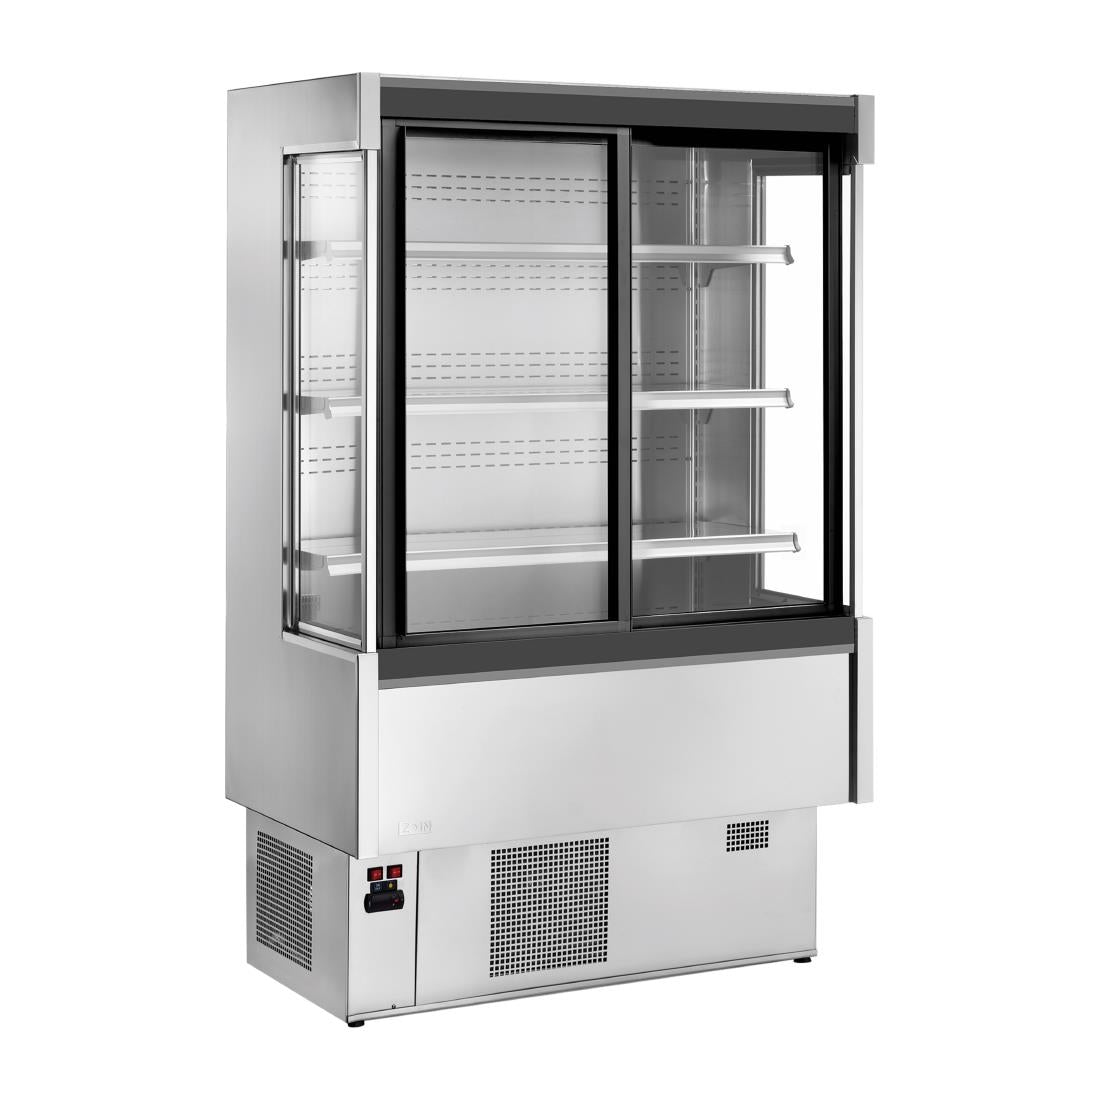 UA056-120 Zoin Silver Multideck Display Stainless Steel Finish with Sliding Doors 1500mm